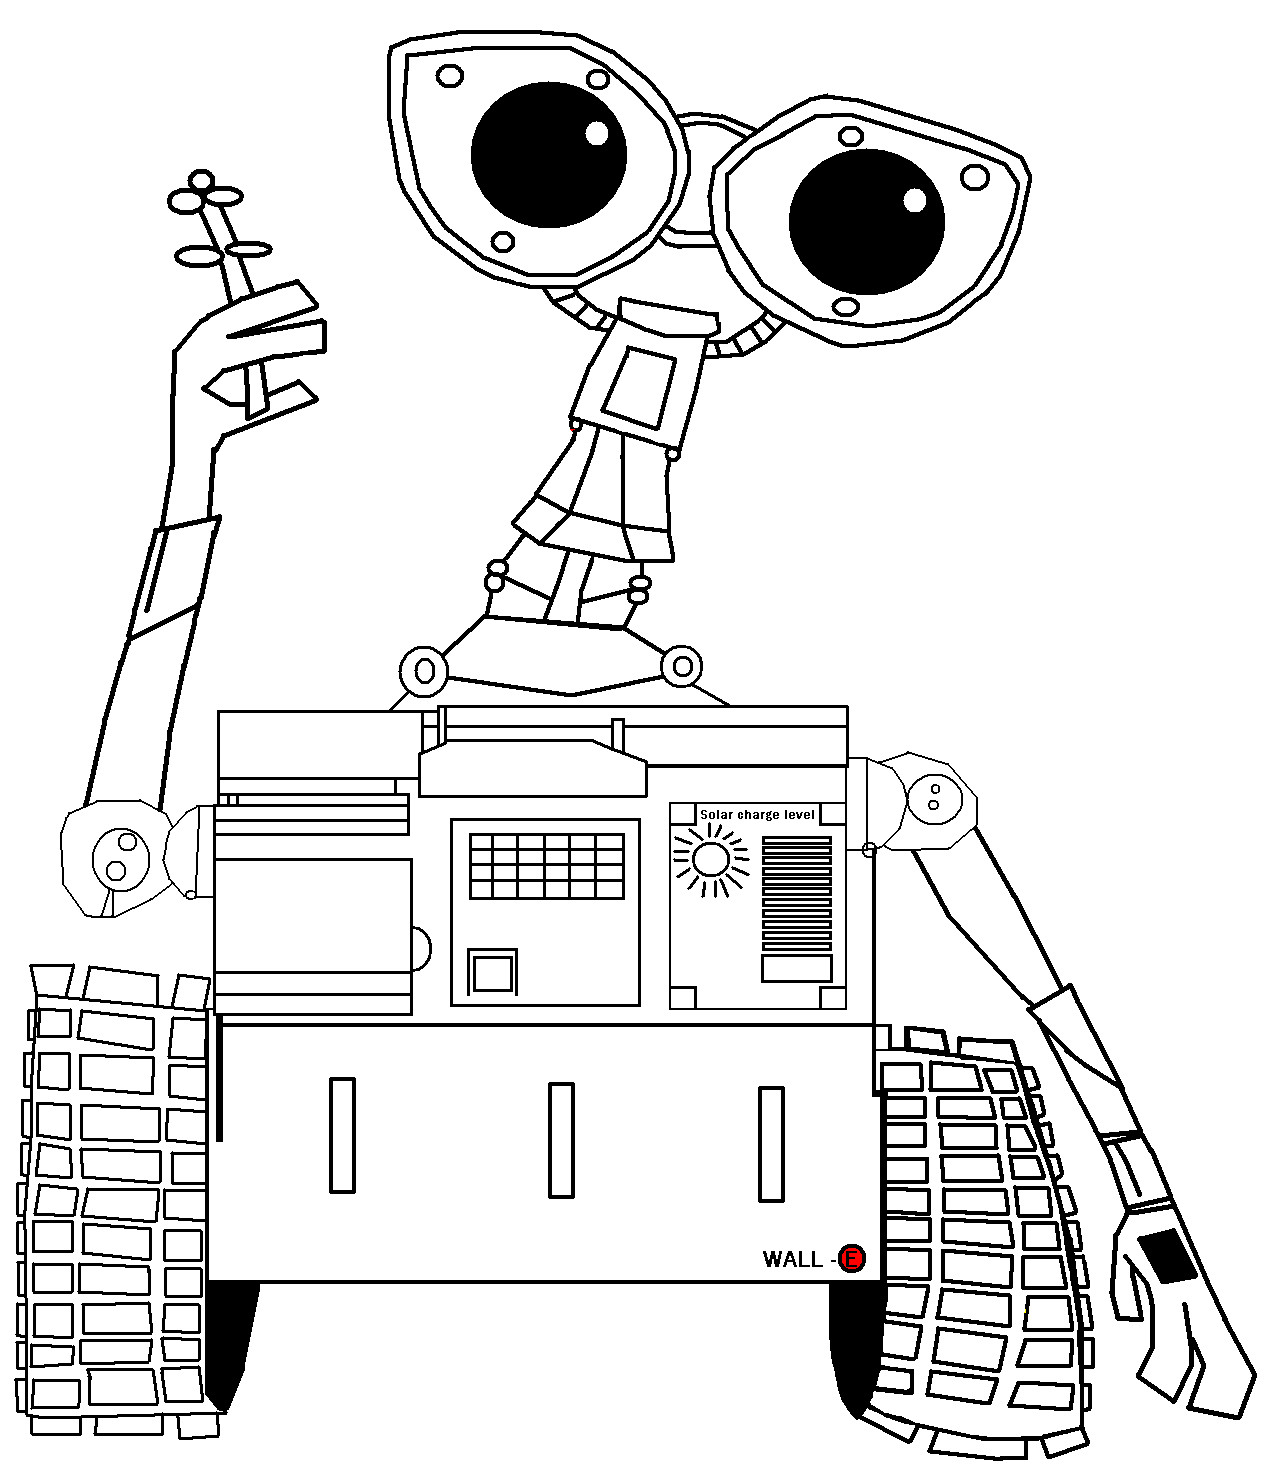 Wall-e by NumberOneCow